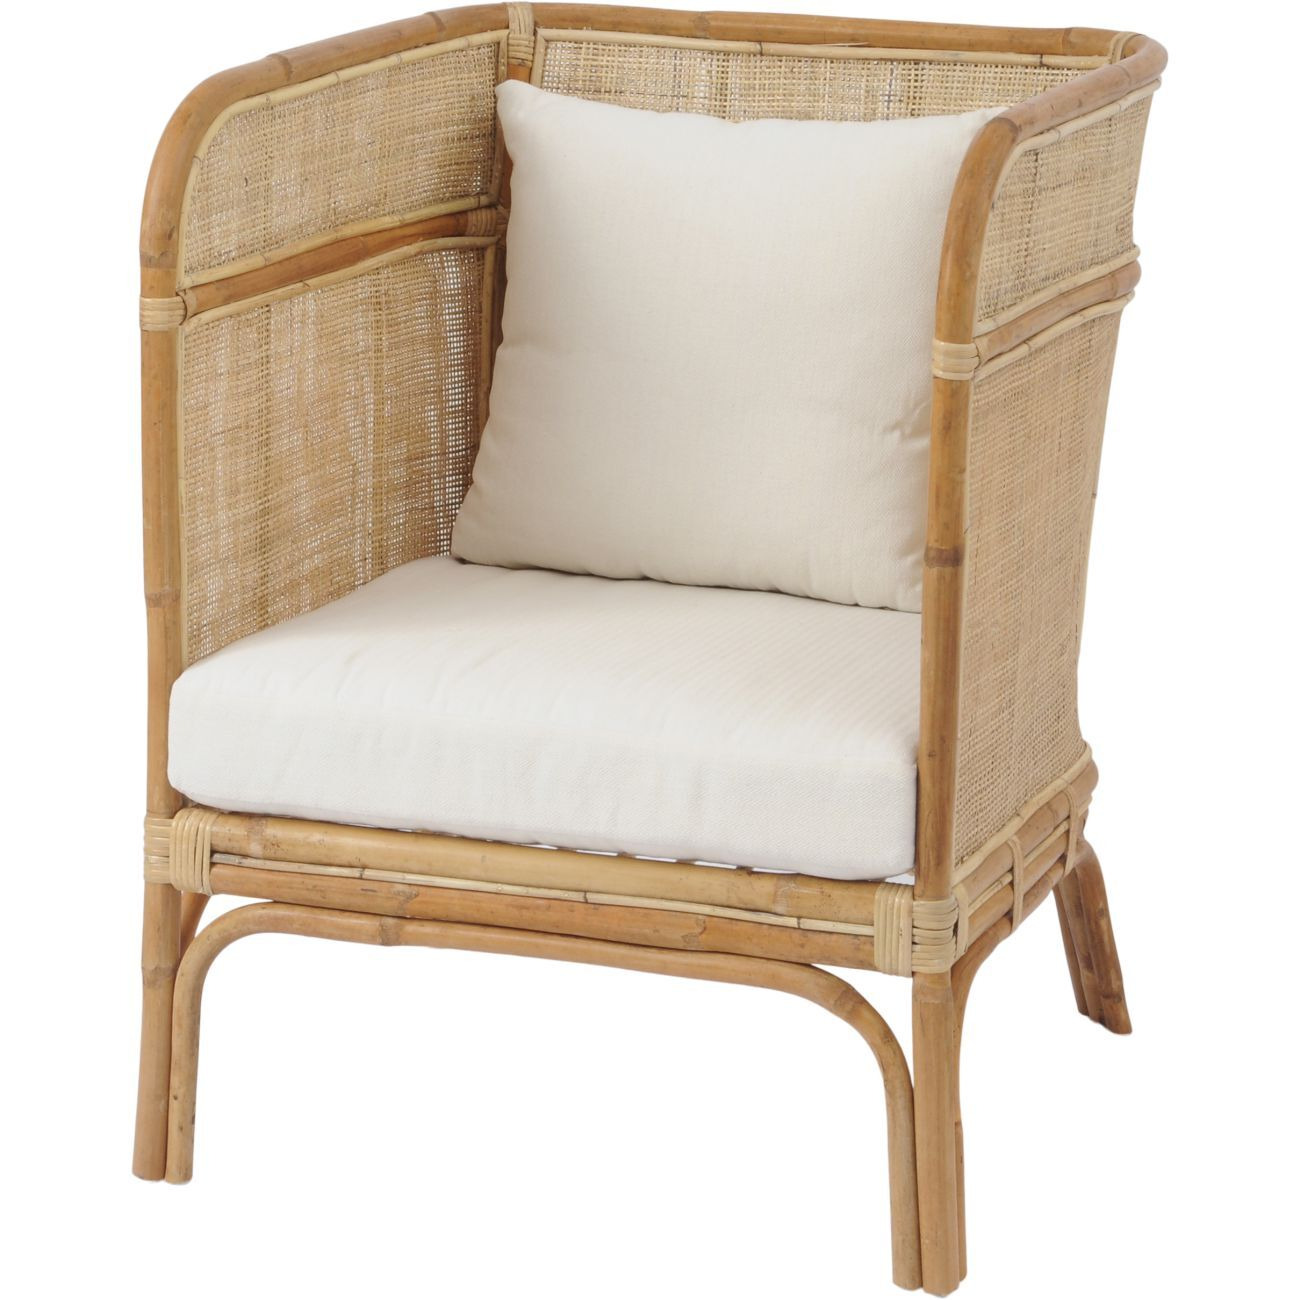 Libra Toba Natural Occasional Chair with High Wrap Round Back Rattan - Outlet - image 1